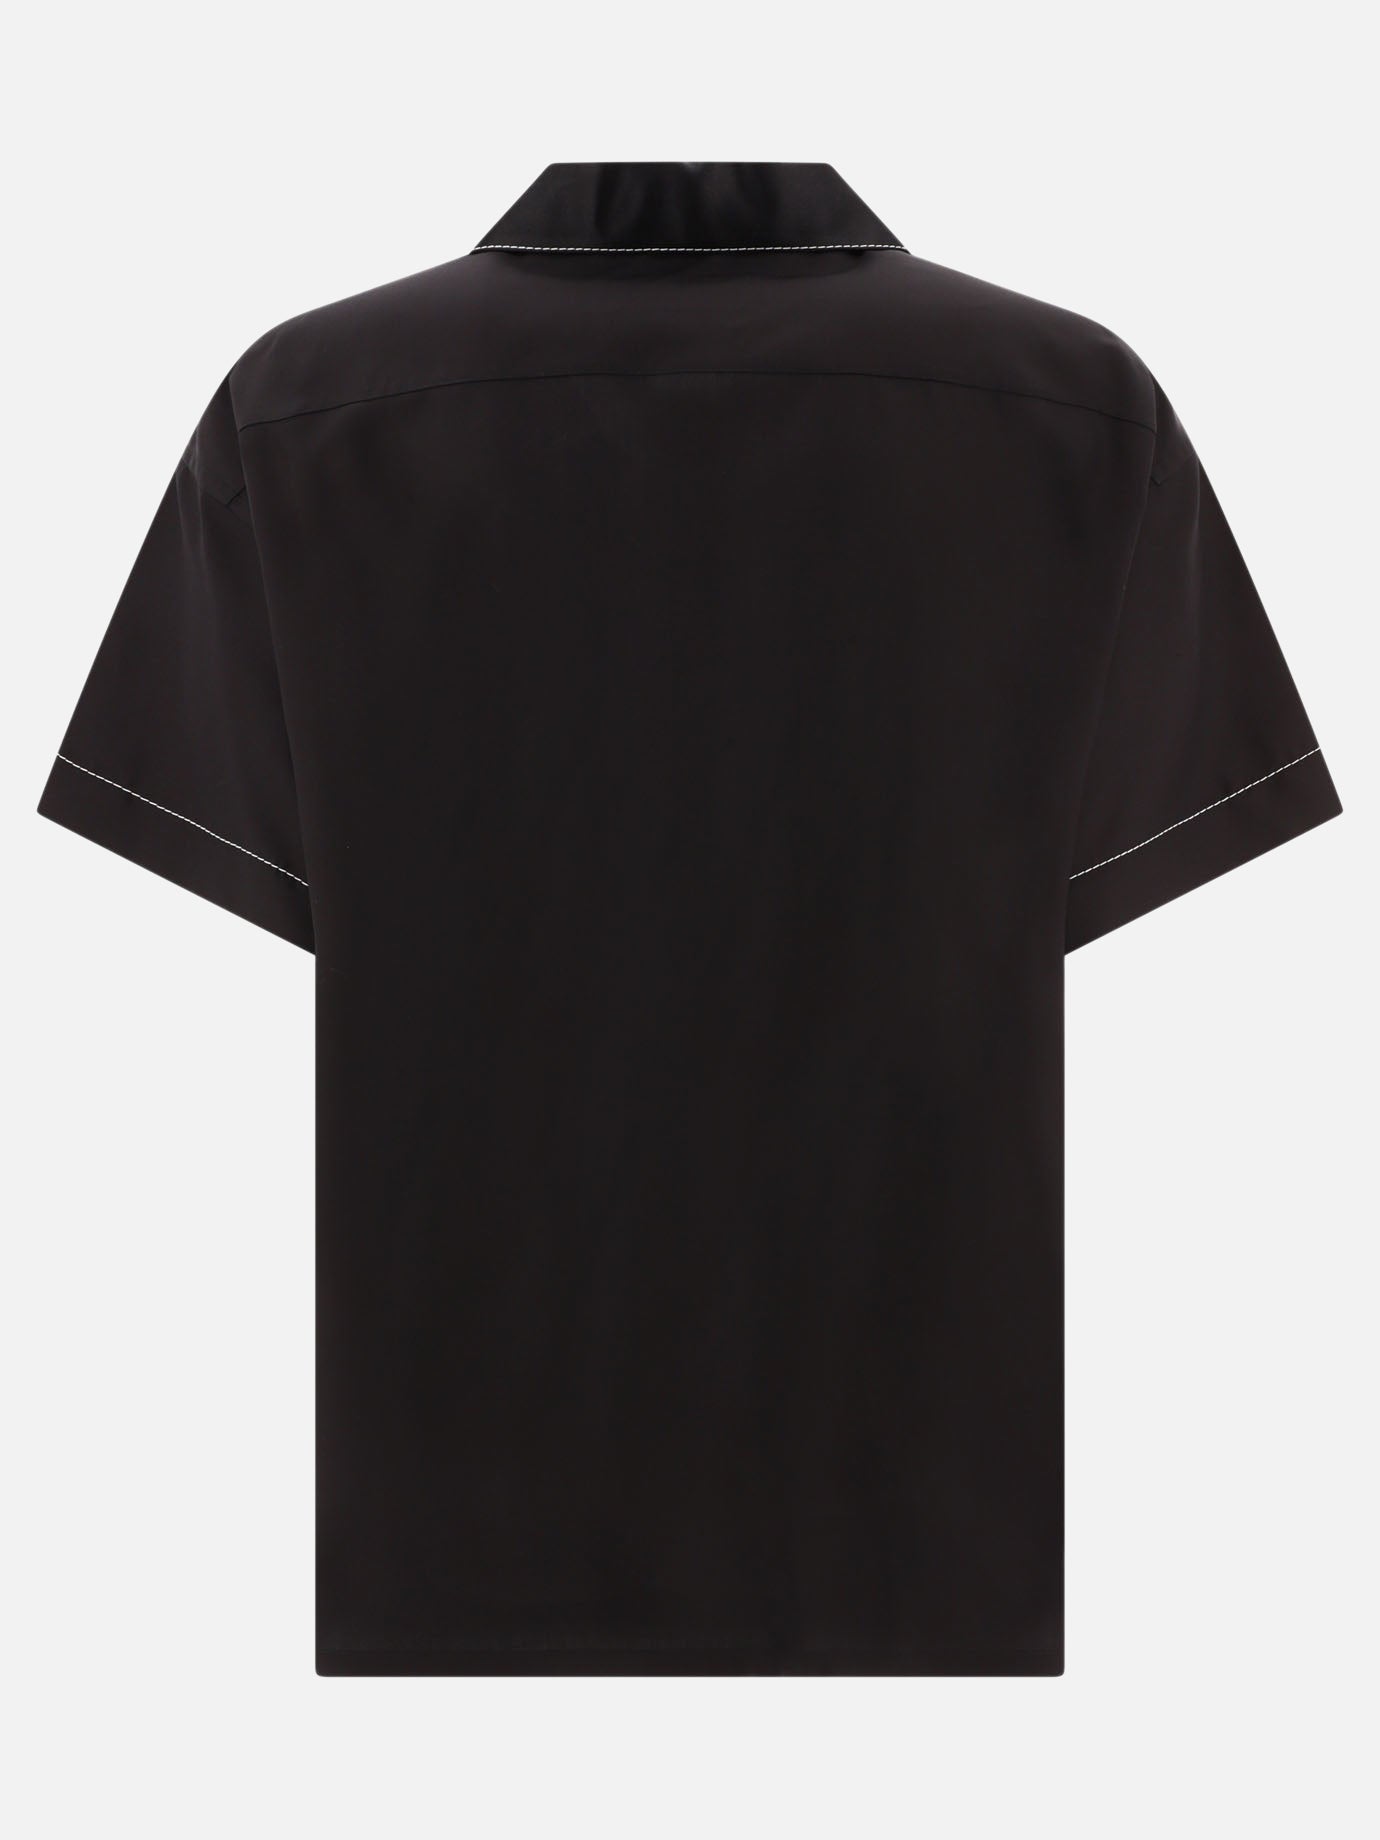 Shirt with contrasting stitching